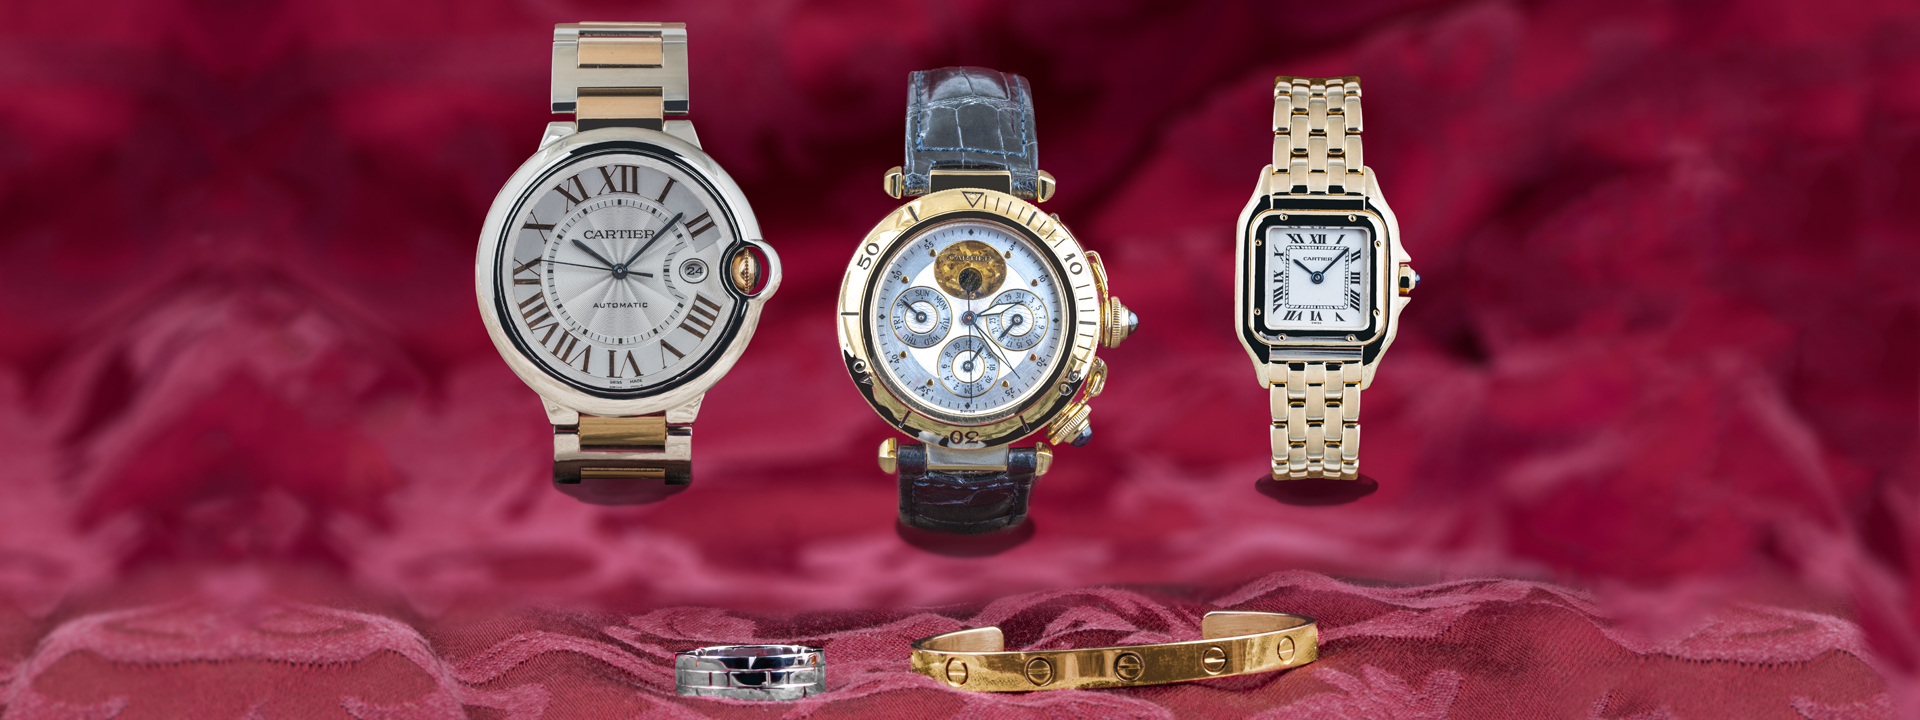 Three pre-owned Cartier watches, vintage yellow gold Cartier LOVE bracelet, and vintage white gold Cartier Tank Francaise ring on red velvet background.